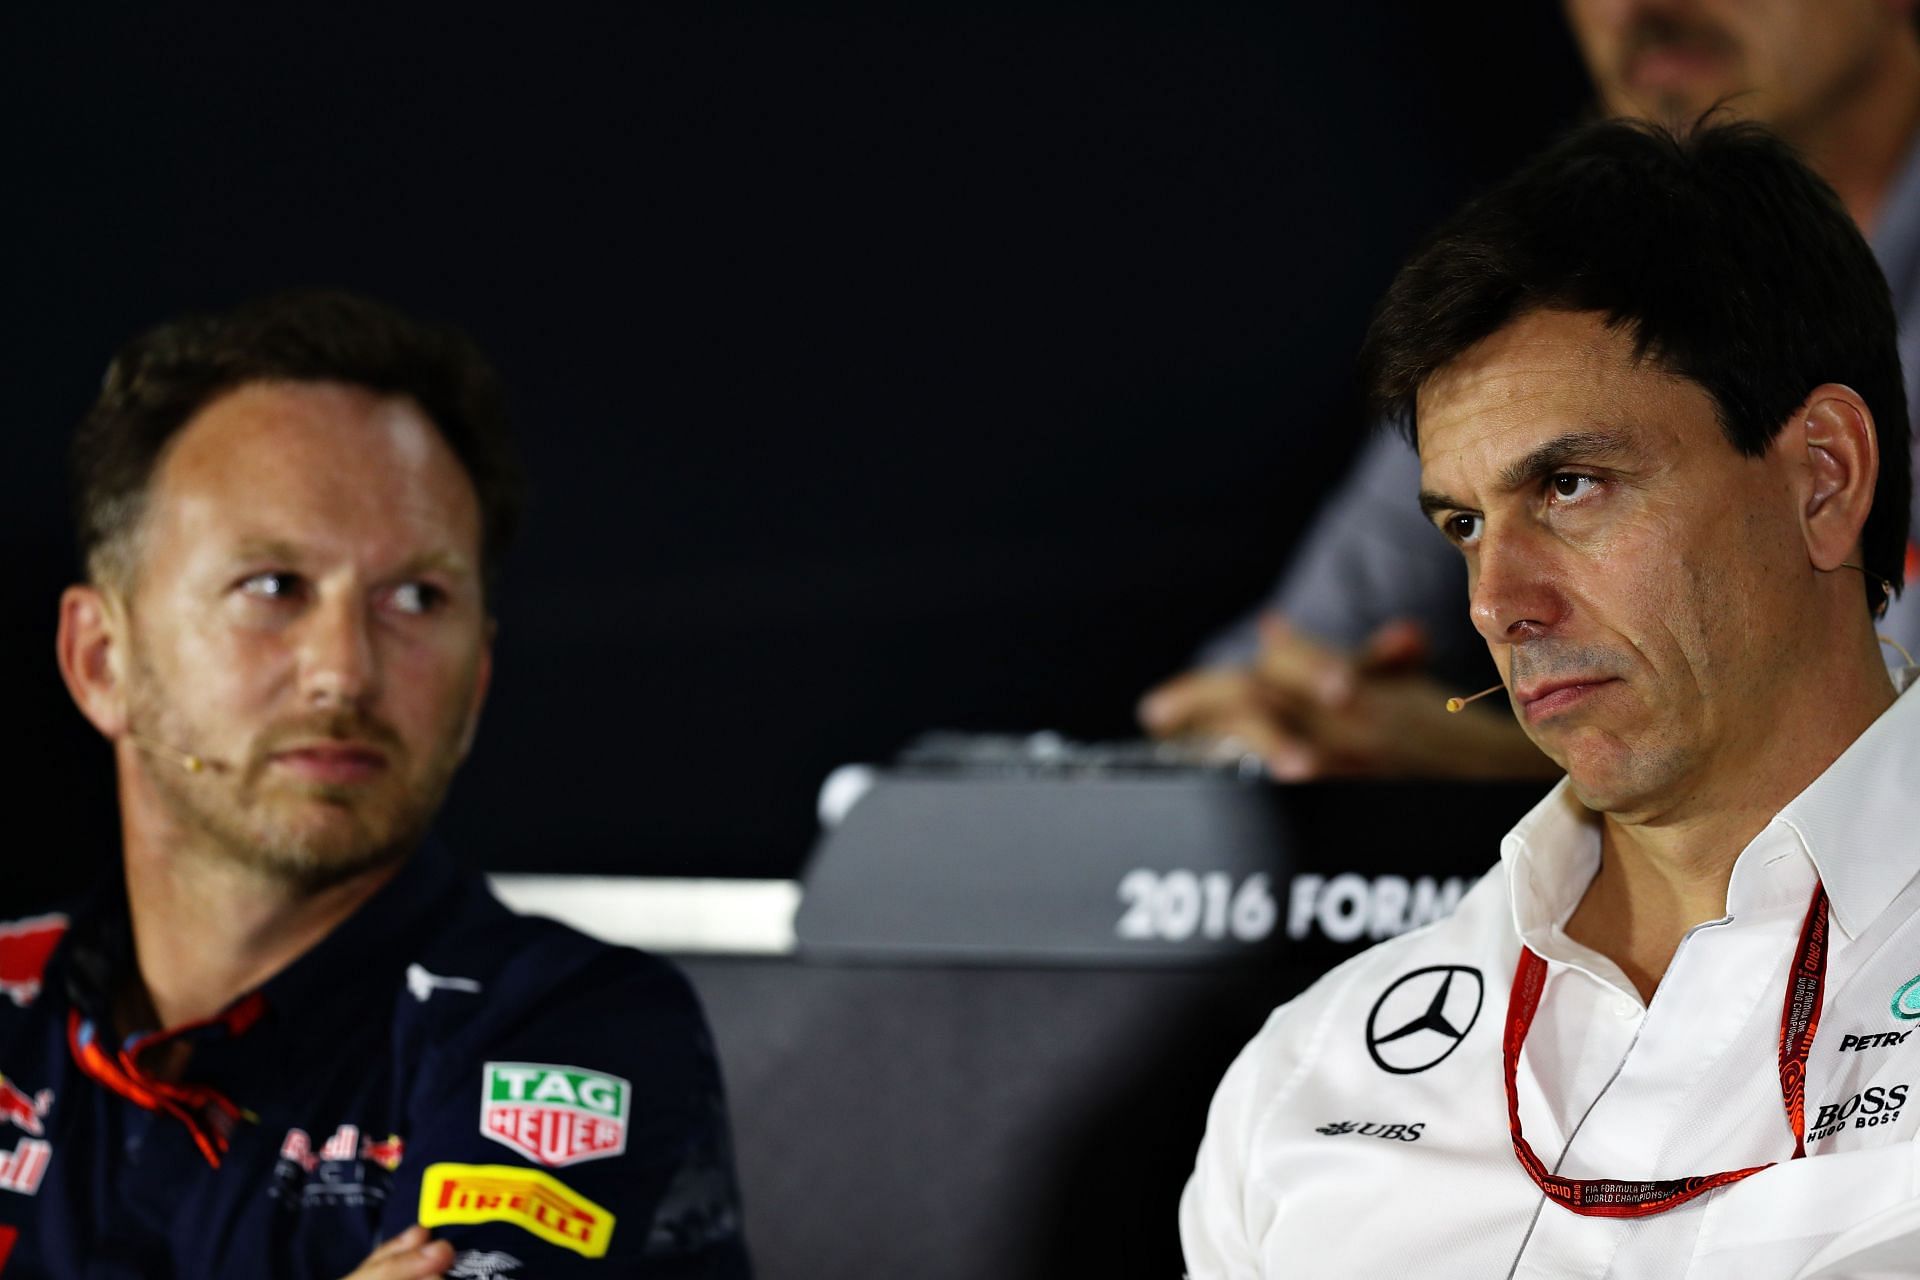 Red Bull boss Christian Horner (left) and Mercedes boss Toto Wolff (right) during the 2016 Singapore Grand Prix (Photo by Mark Thompson/Getty Images)